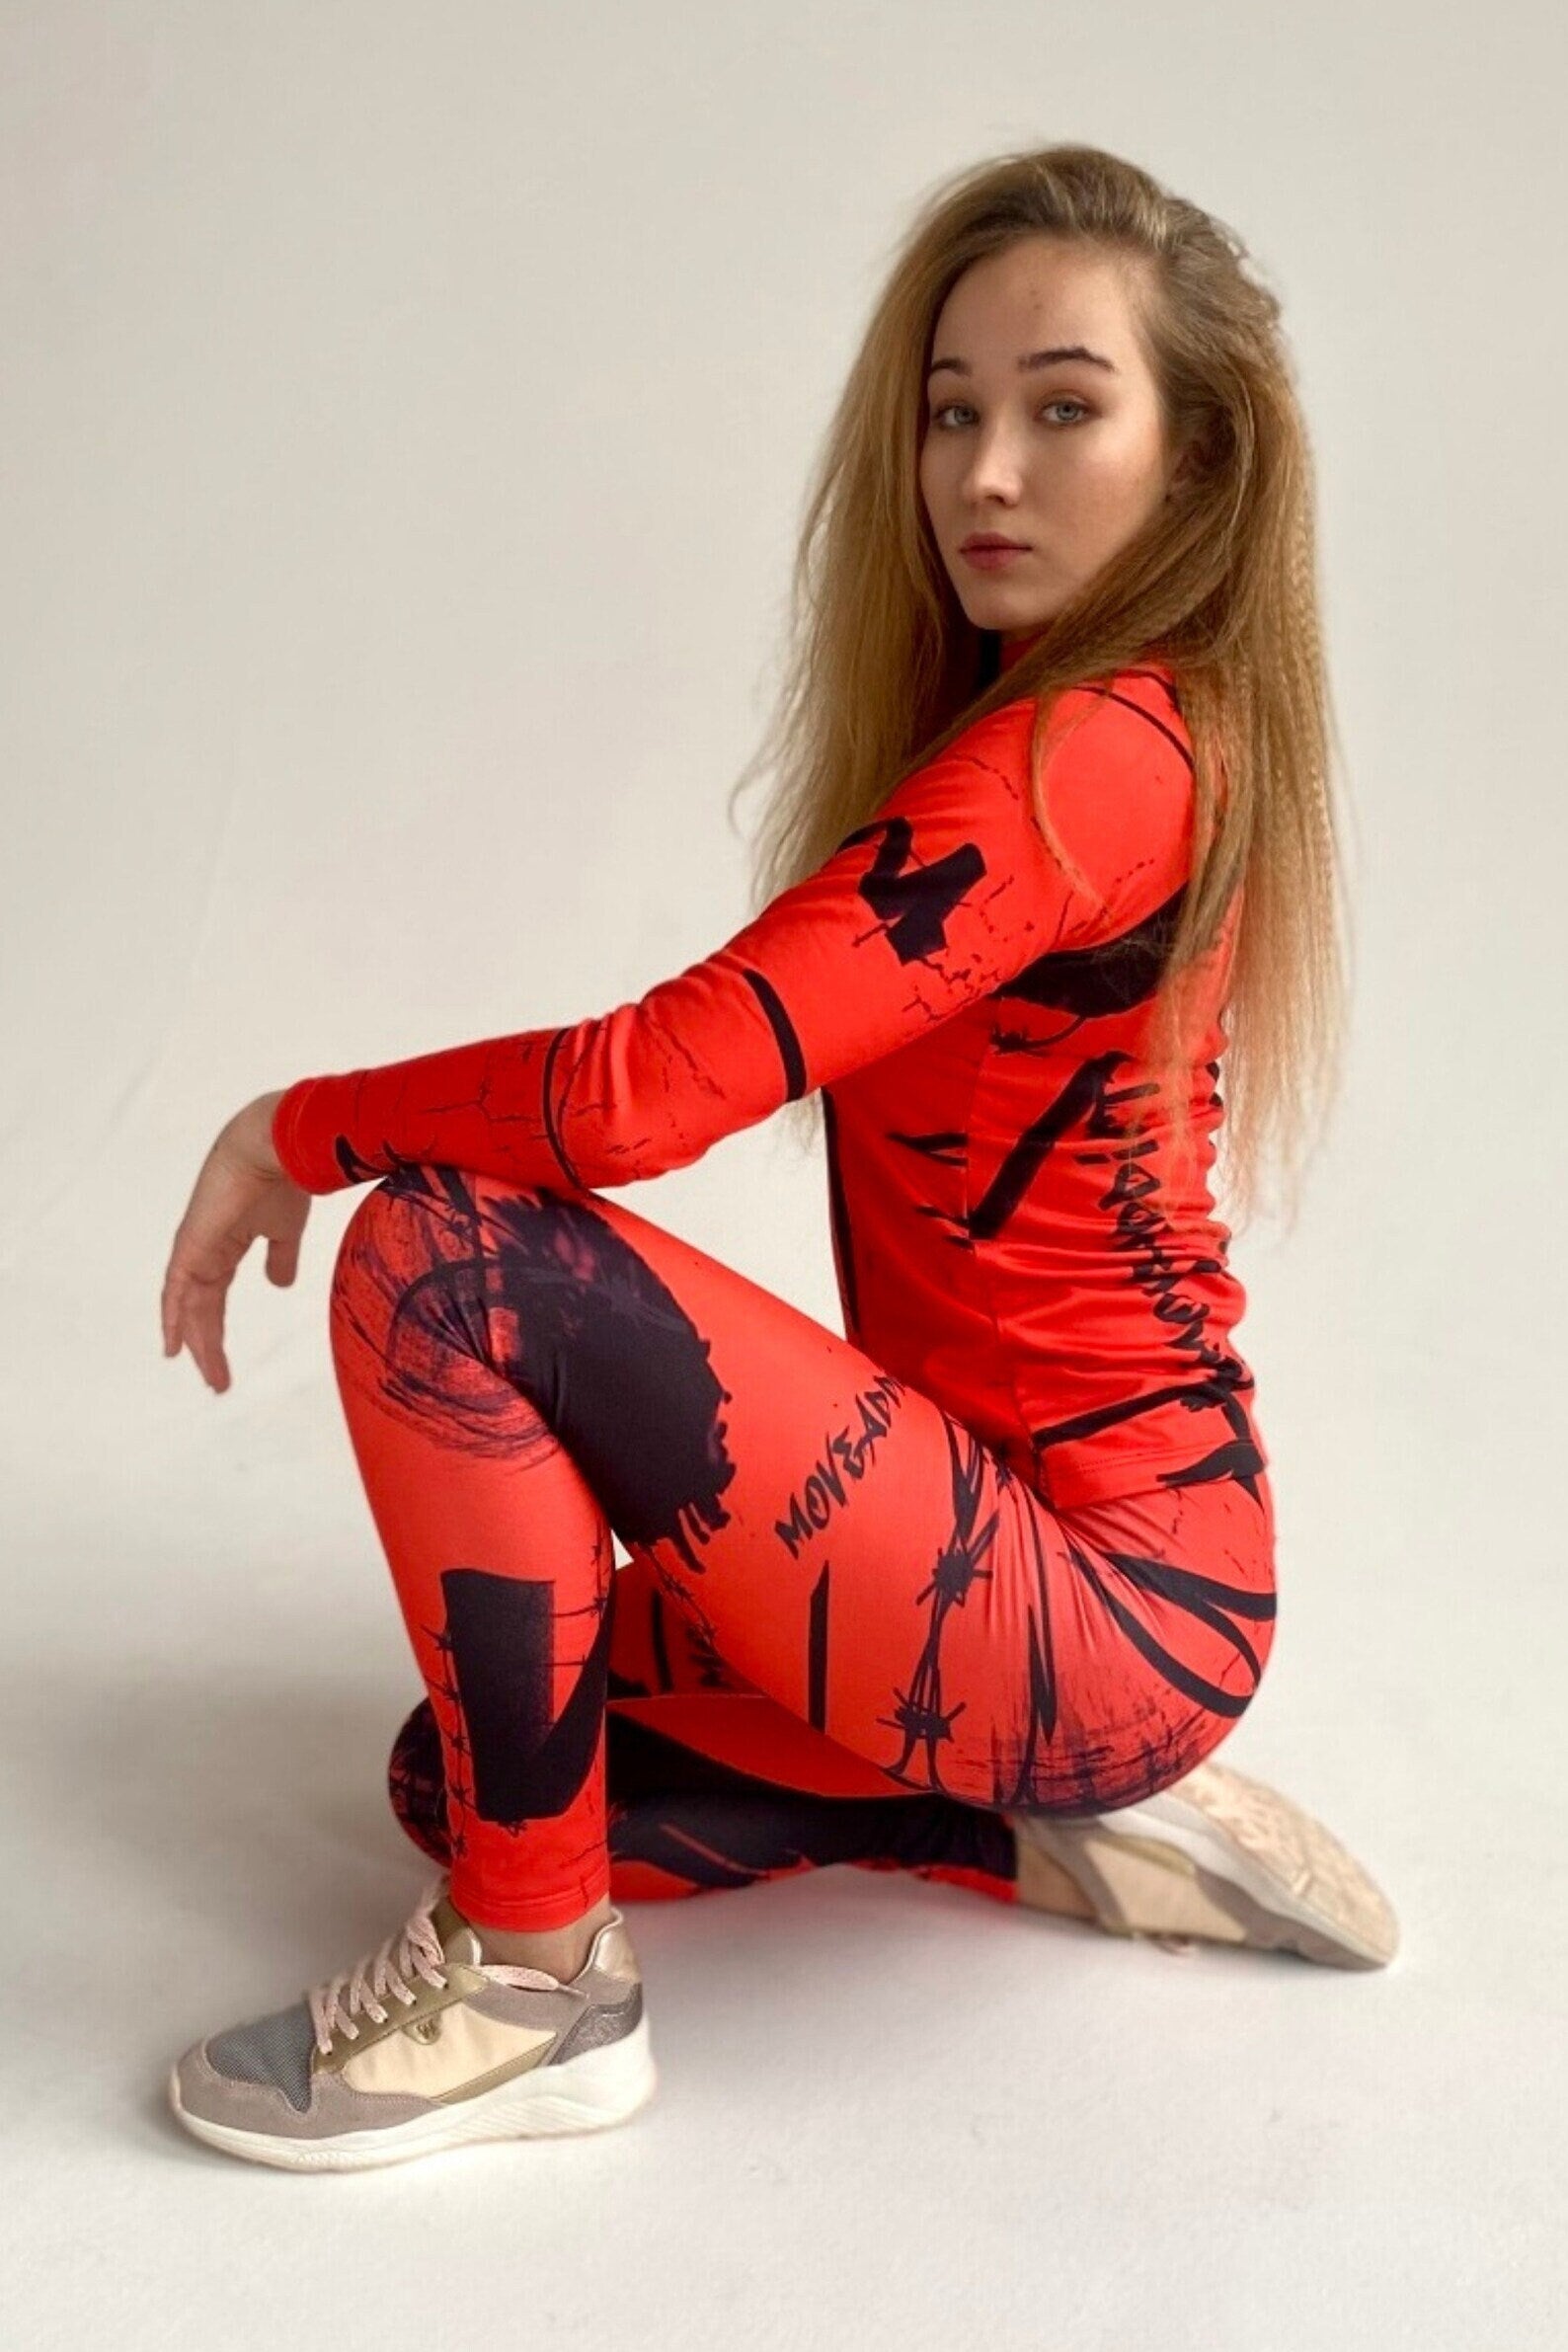 SET: Women's Thermowear, Leggings, Abstract Red Top, Winter Underwear, Thermal Protective, Clothing, Sport underwear, Winter Clothes